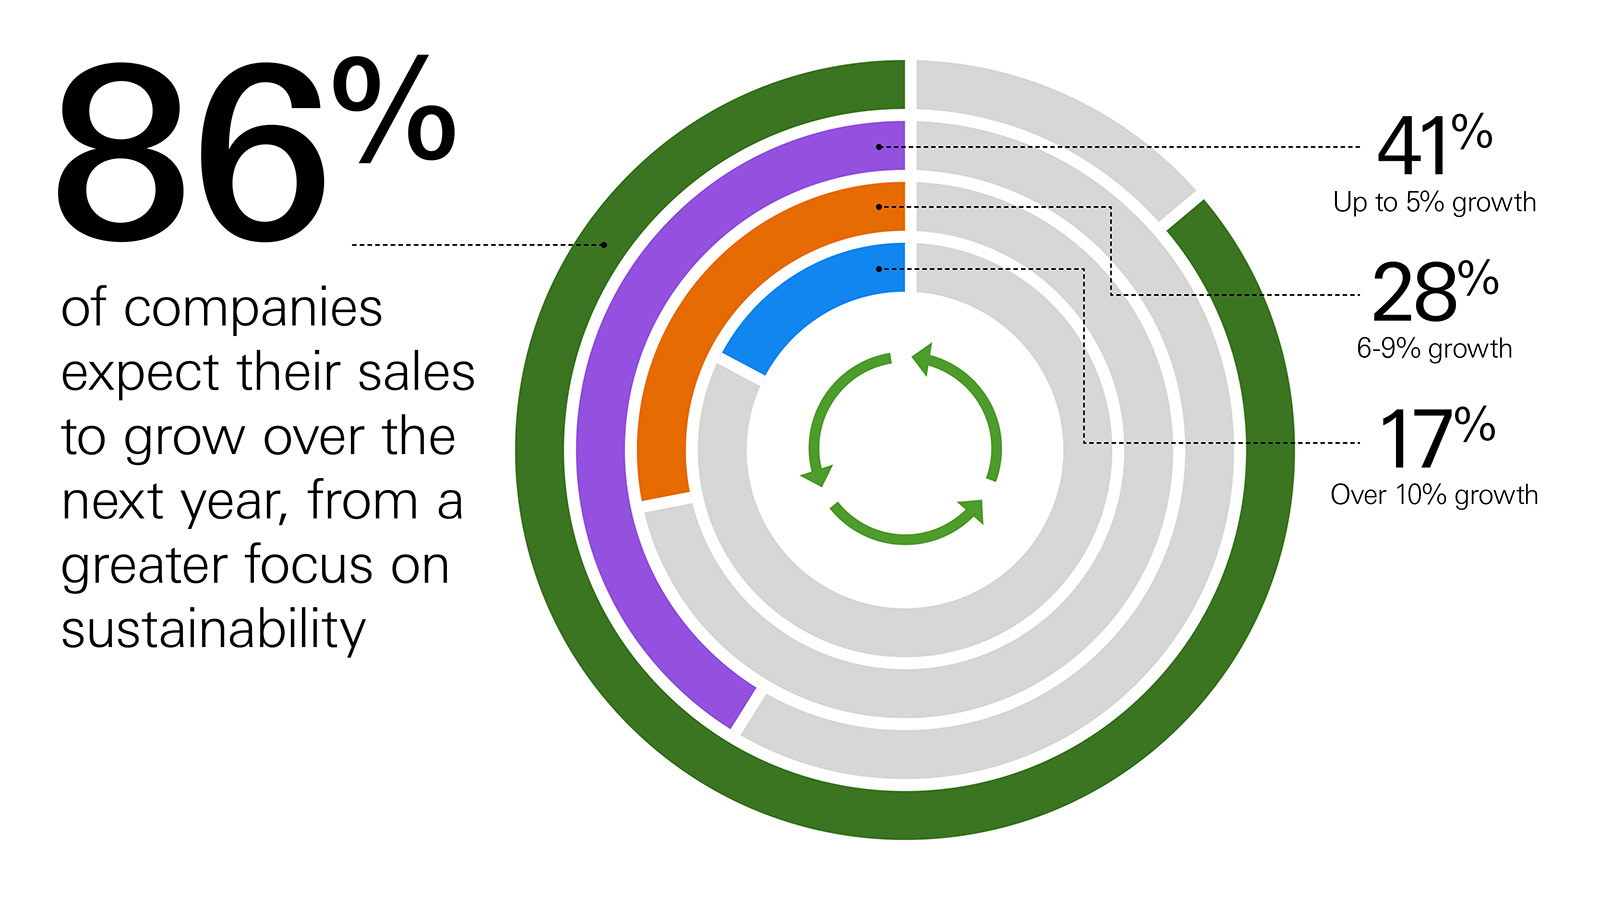 The vast majority of companies are expecting sales growth over the next year